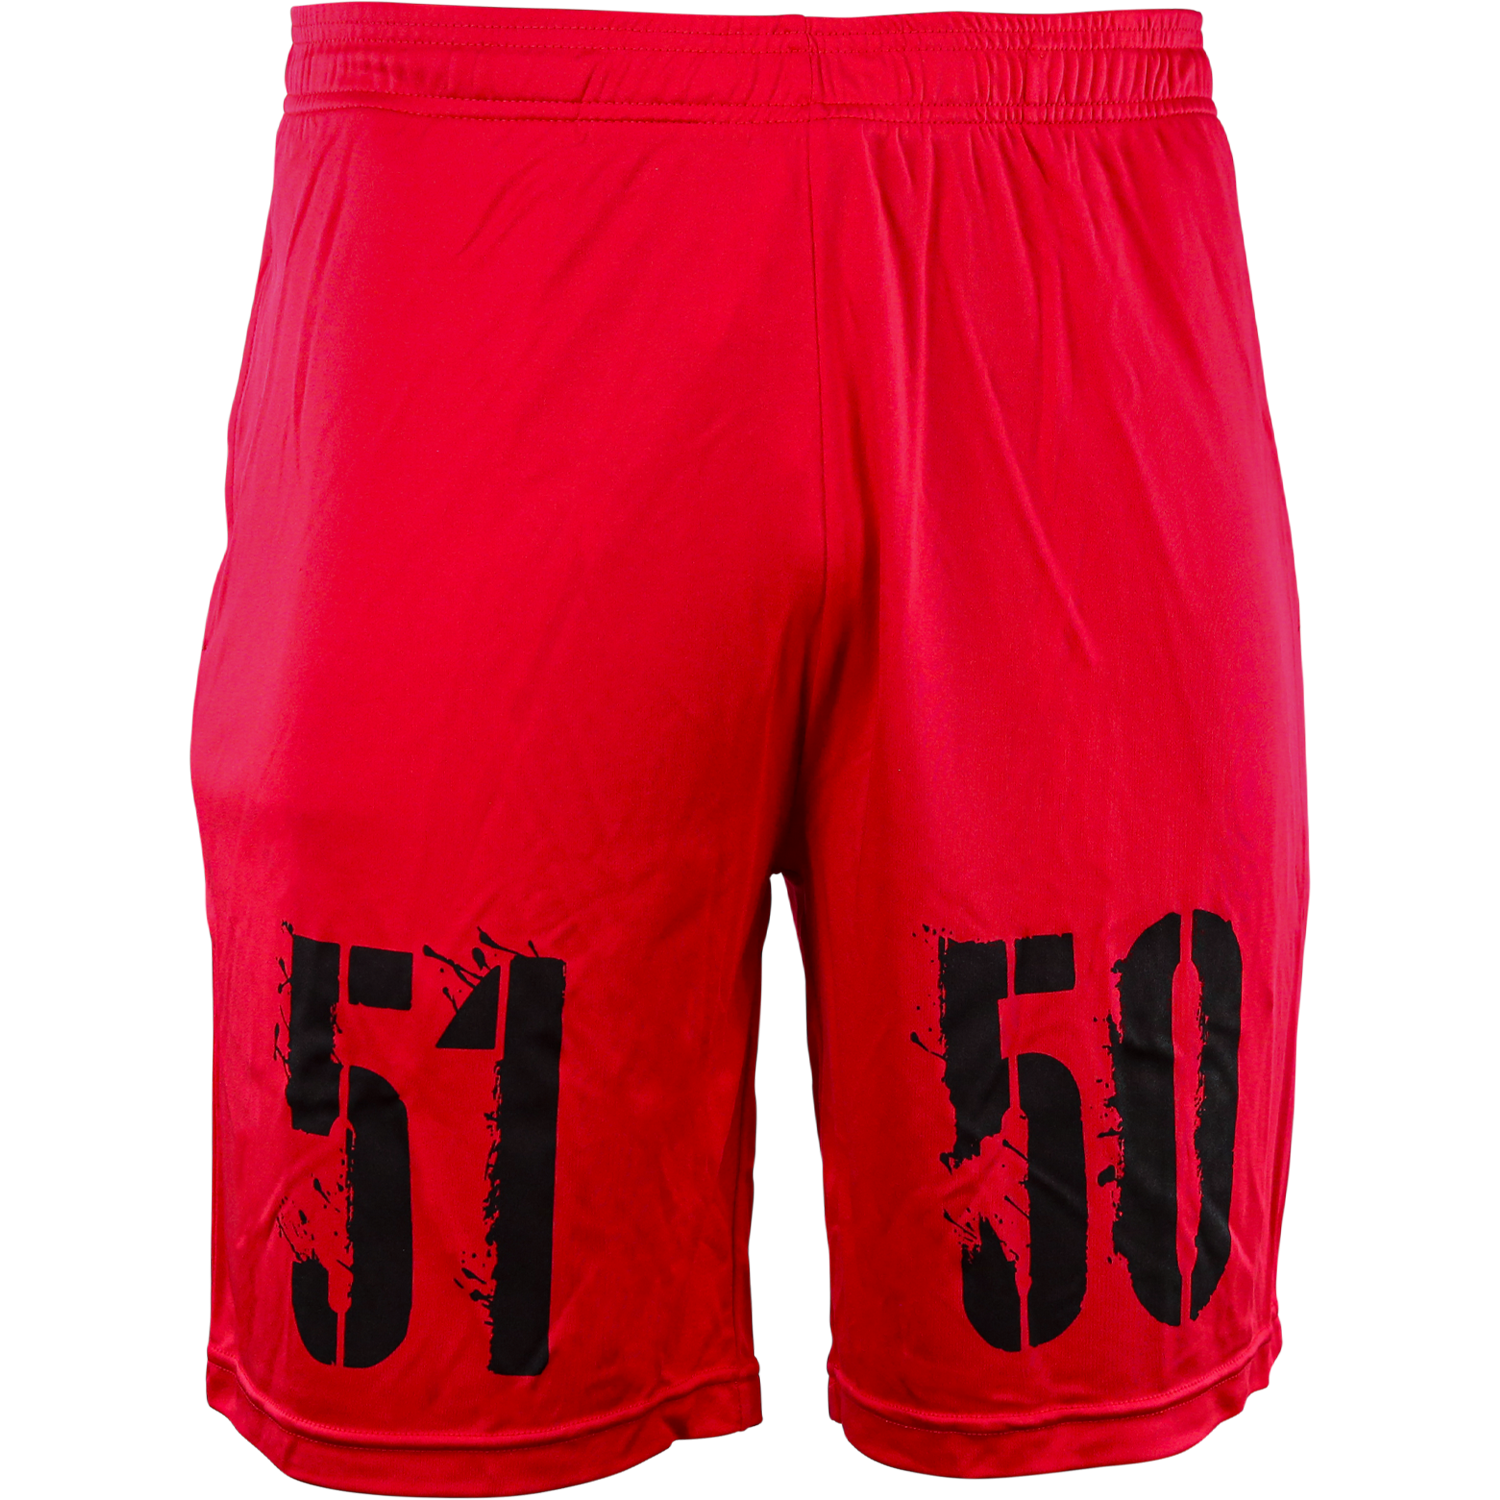 5150 Red Shorts with Black Lettering